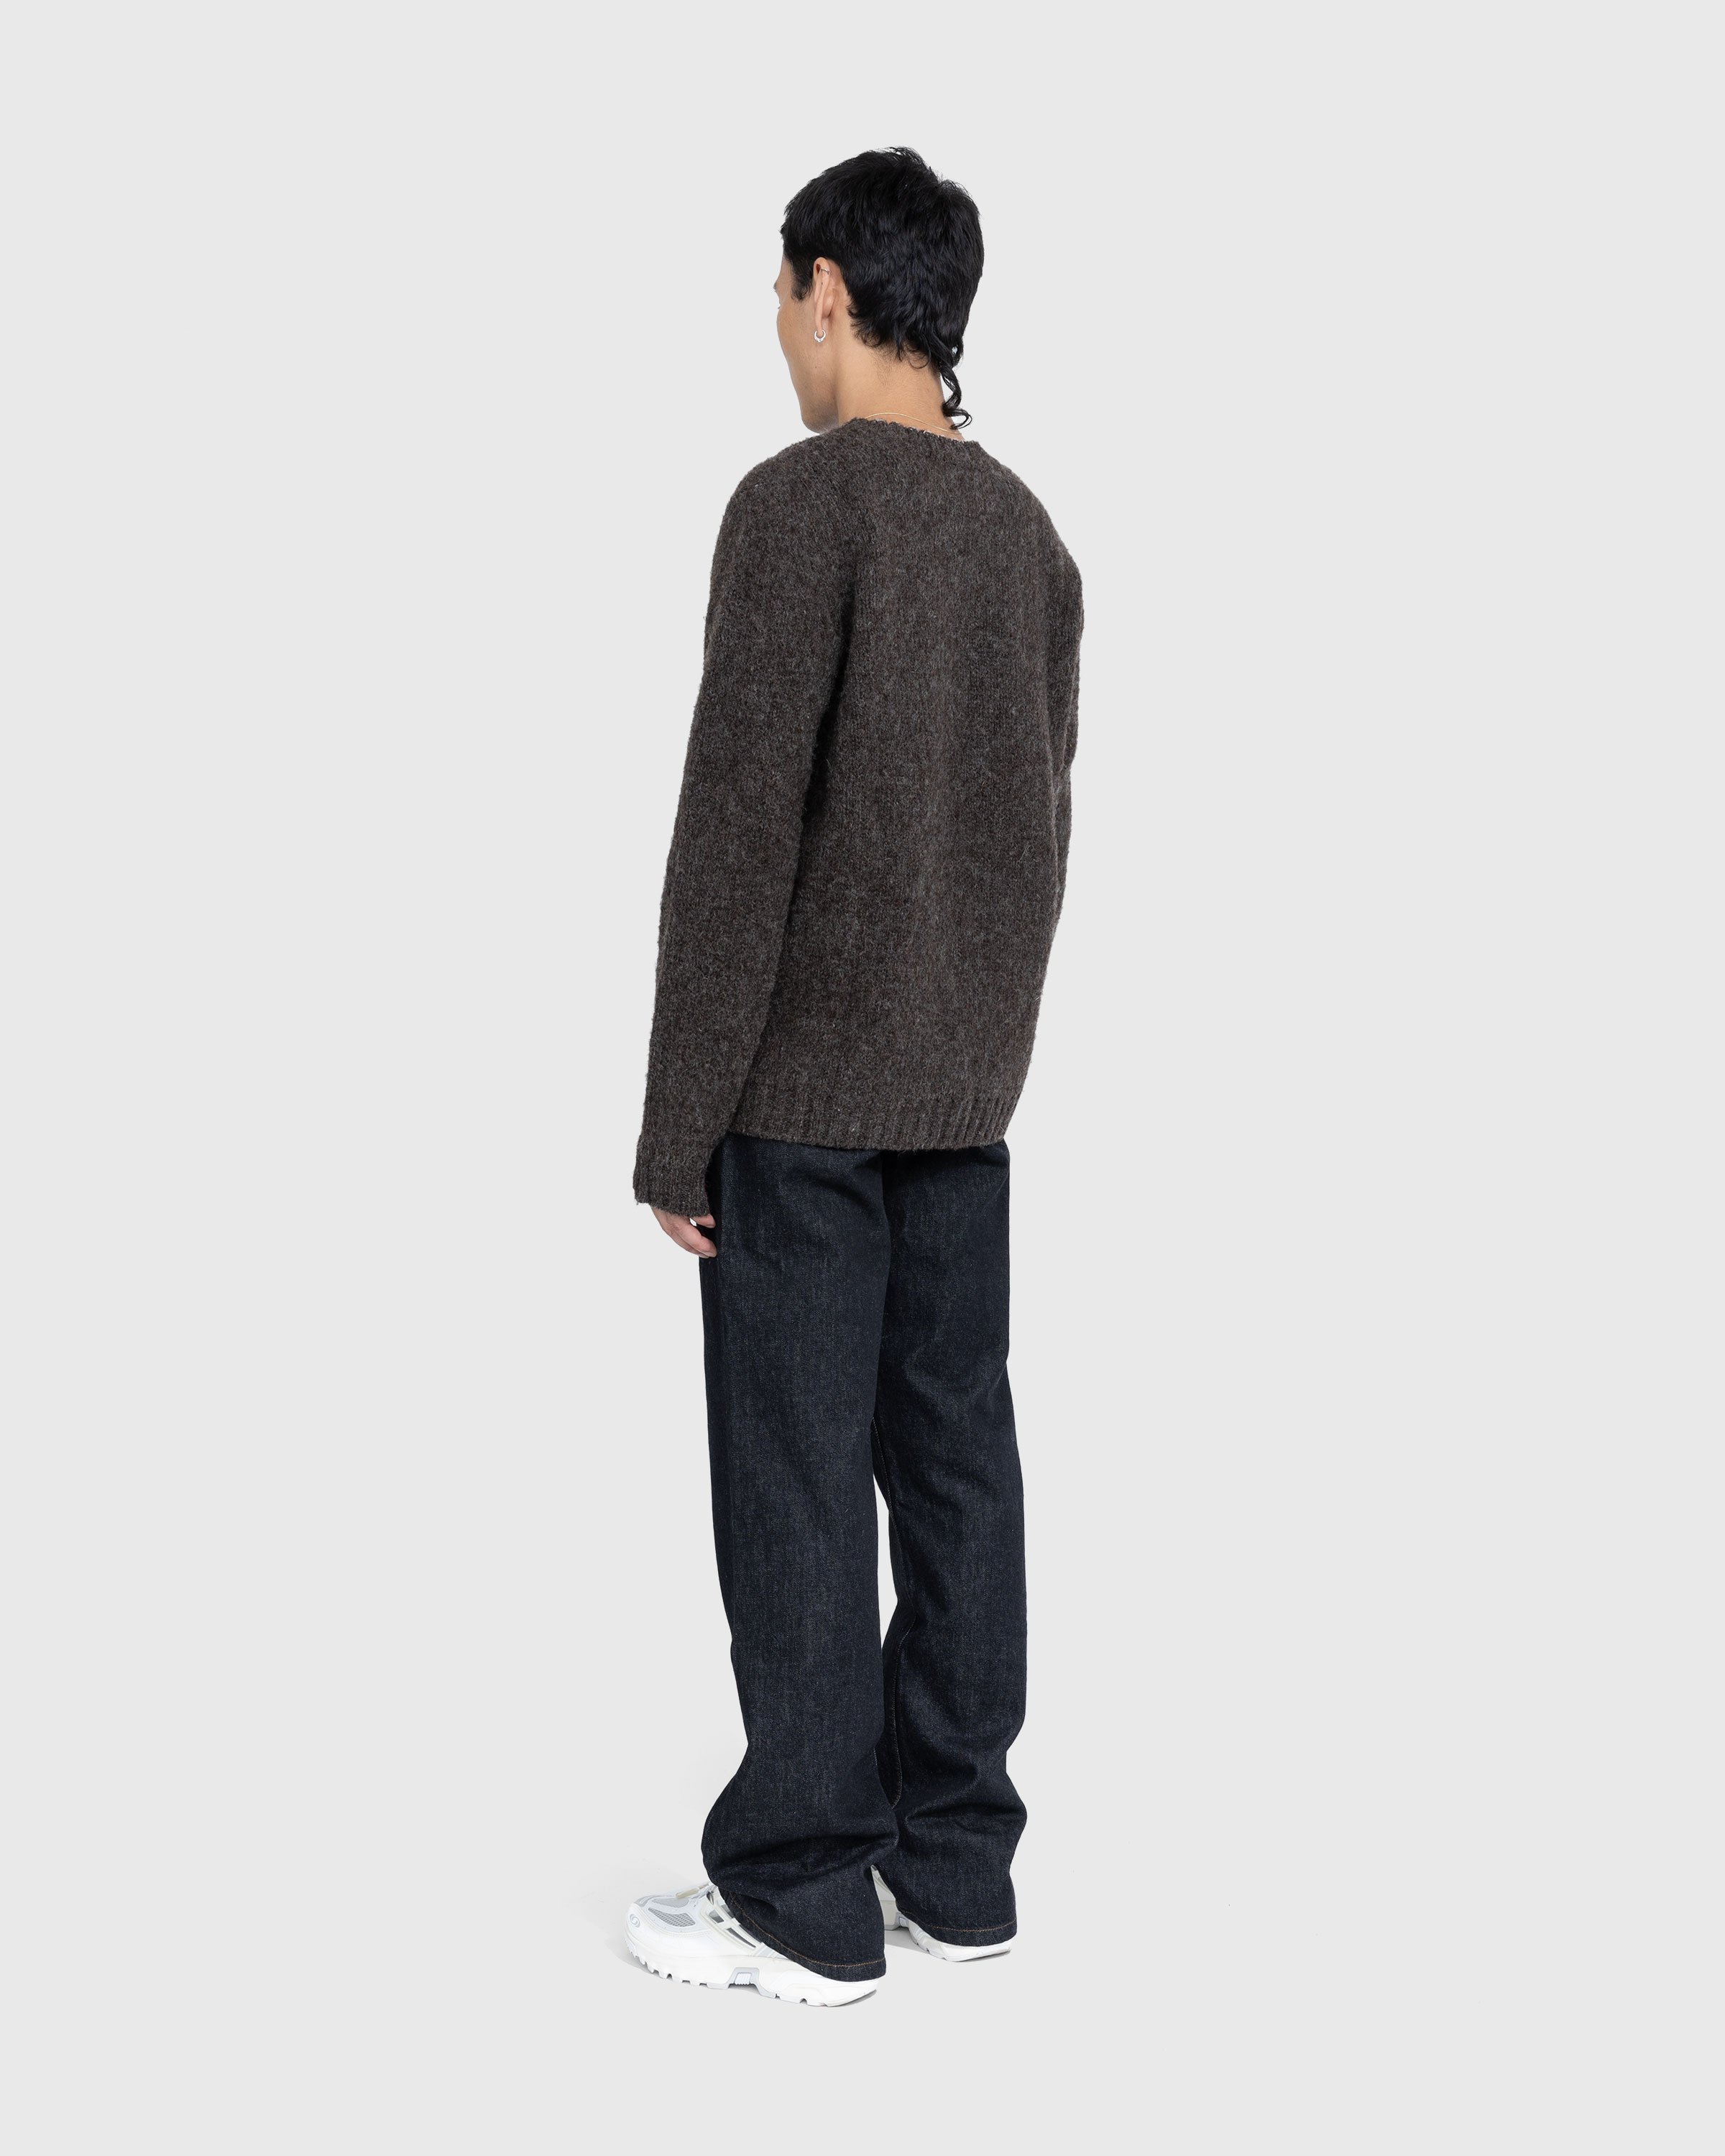 A.P.C. x J.W. Anderson - Pull Ange Brown - Clothing - brown - Image 6